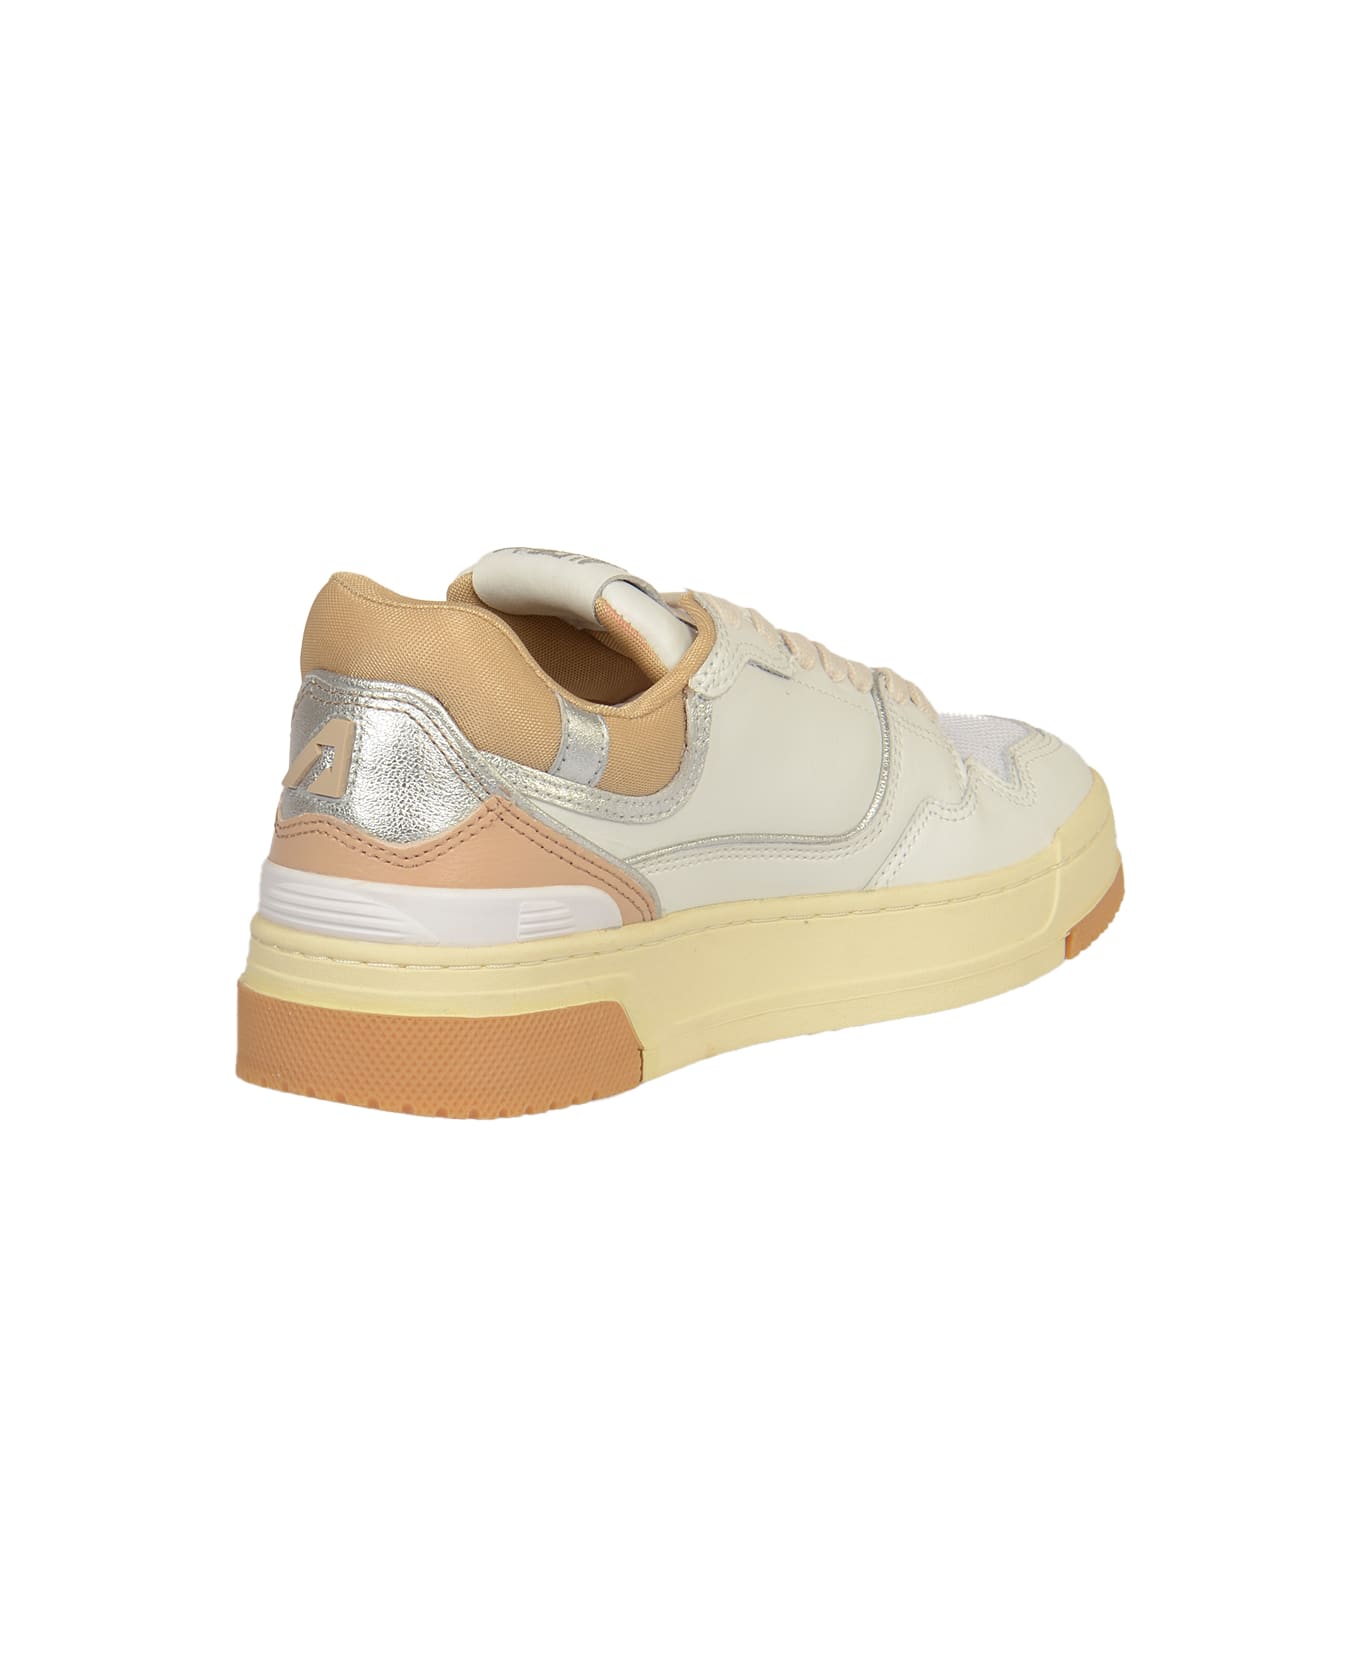 Autry Clc Low Sneakers - Wht/silv/candging スニーカー